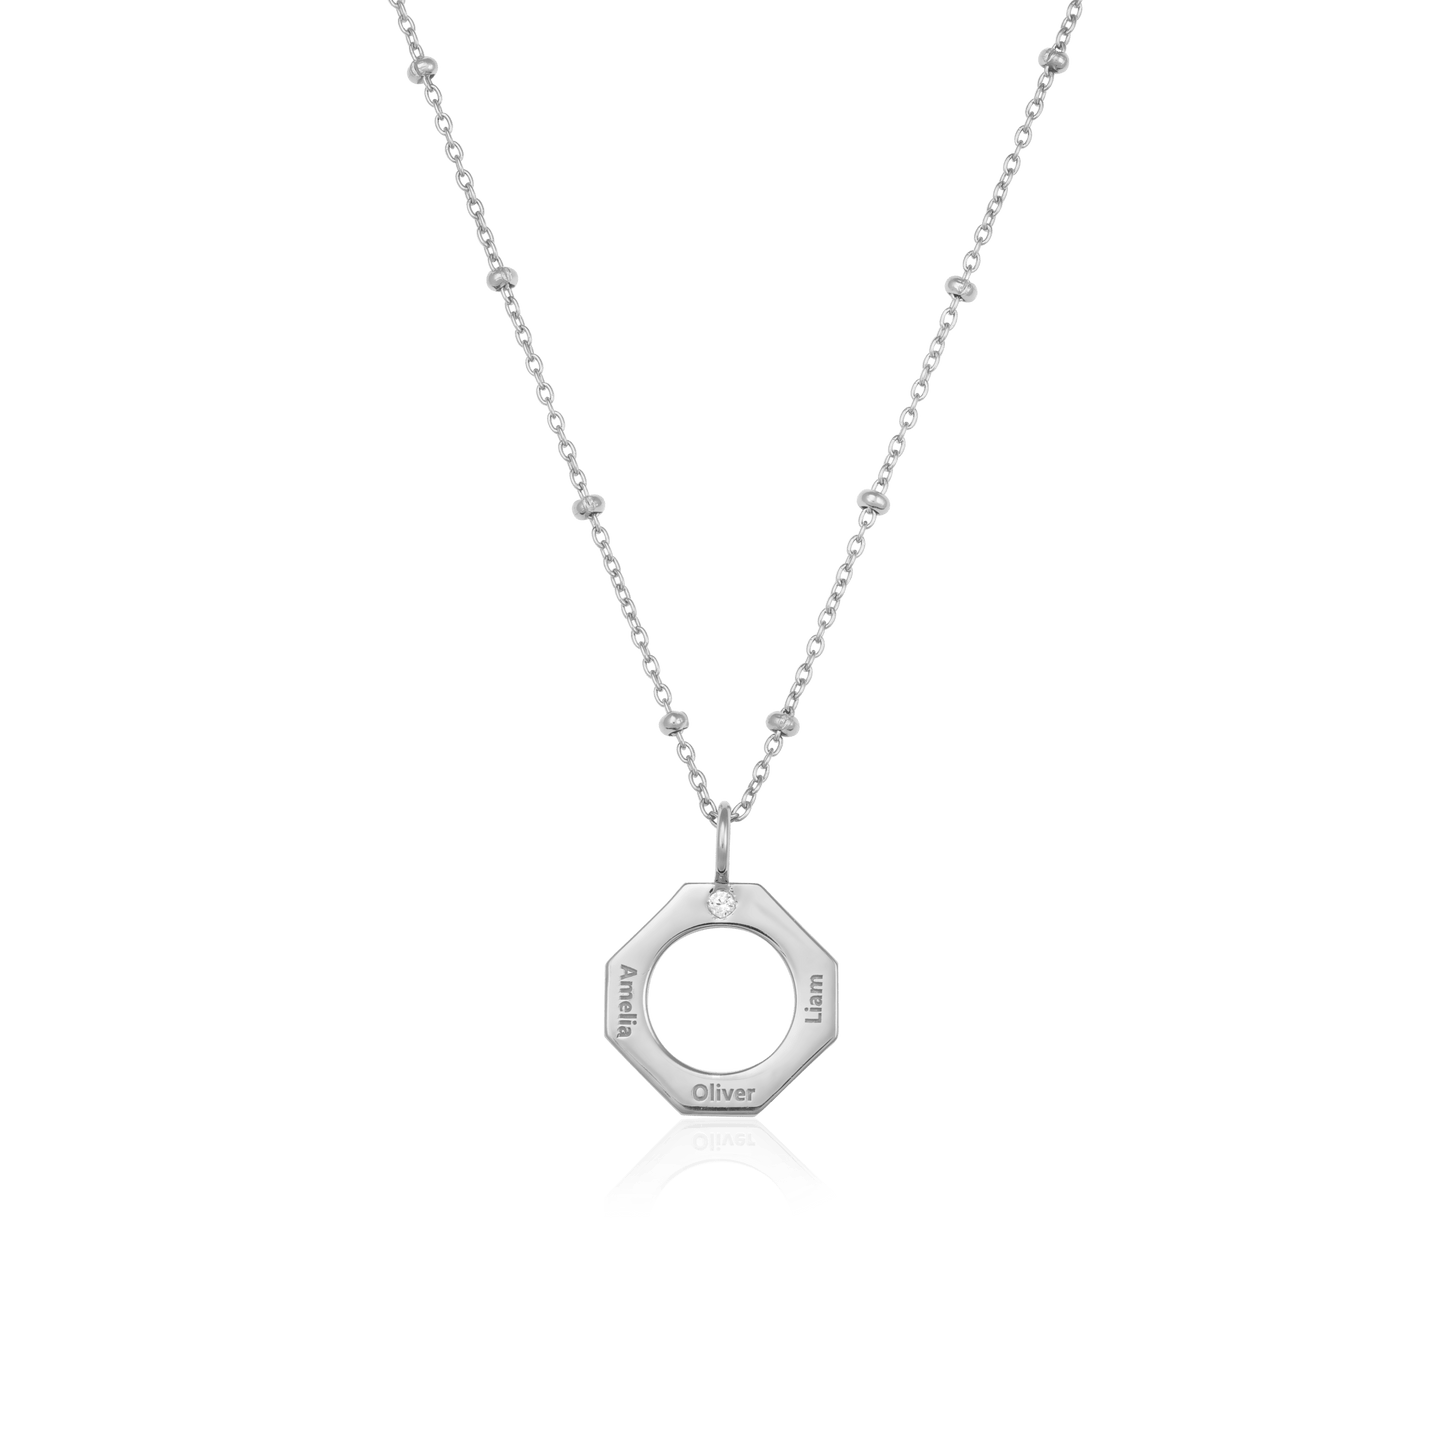 Geo Necklace - 925 Sterling Silver Necklaces 925 Silver 1 Name Small - 16 Inches (40cm) 